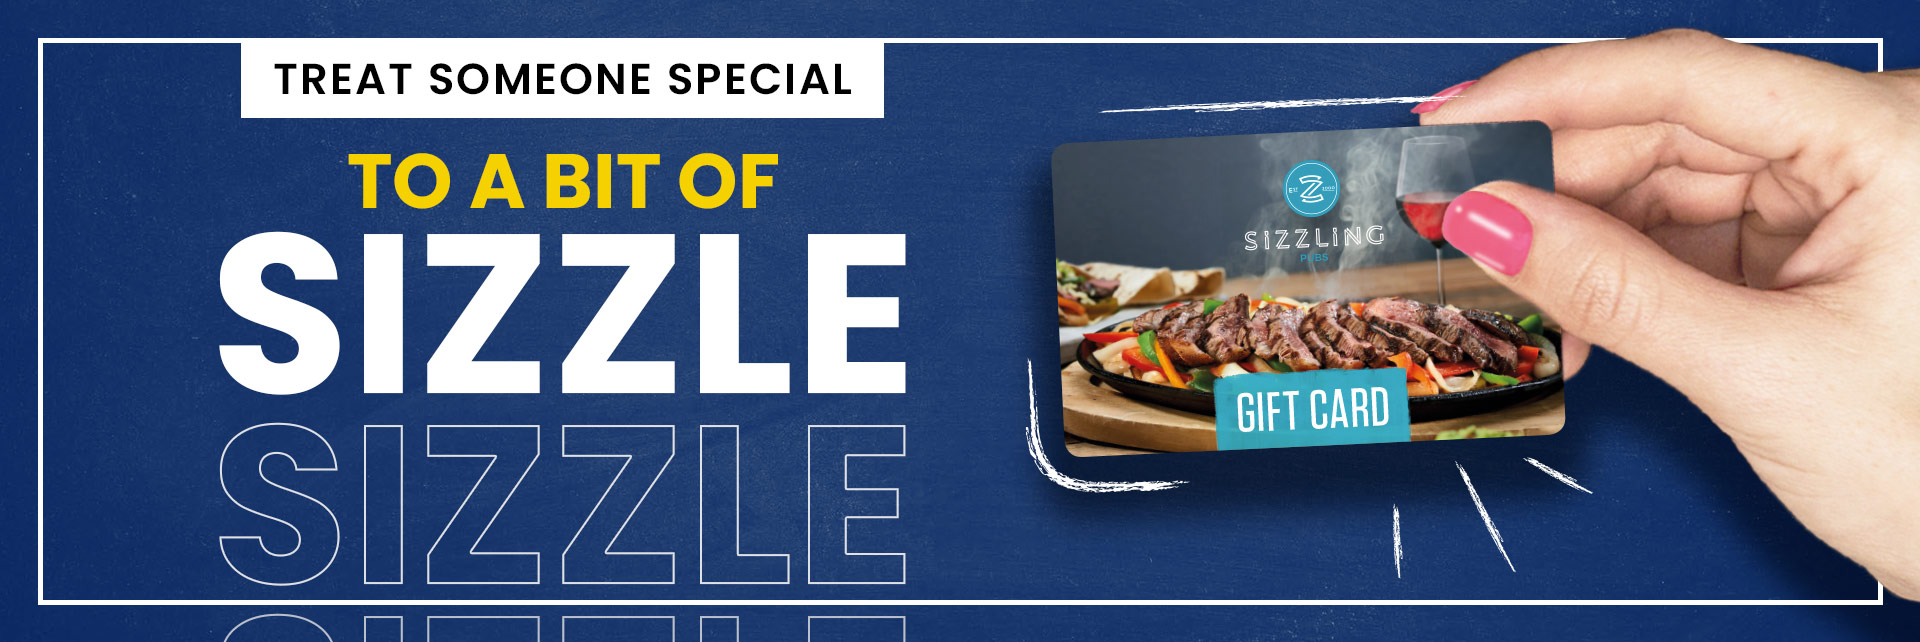 Sizzling Pubs Gift Card at Acorn in Wirral